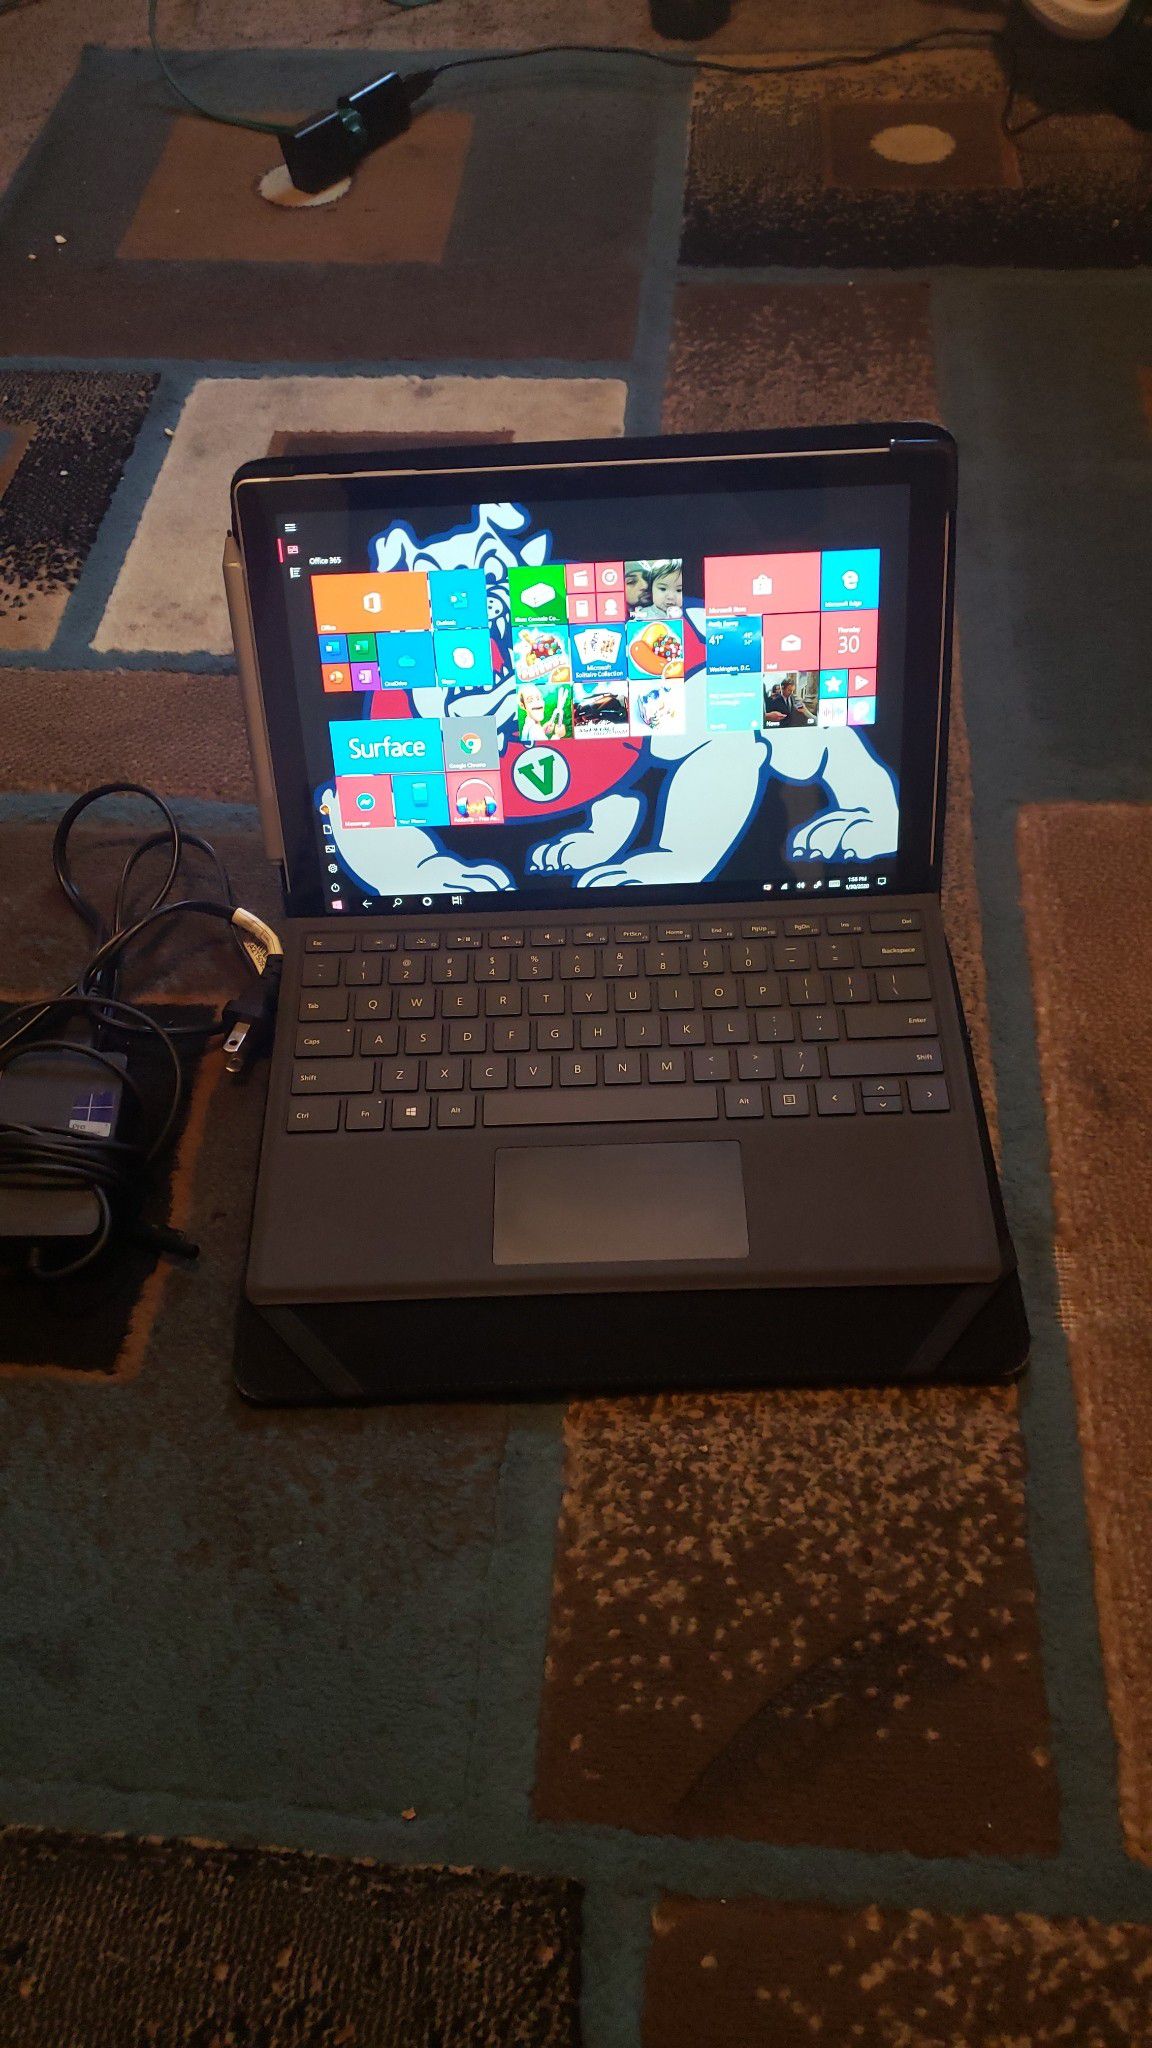 Surface pro 5th gen)256GB, i5, 8GB RAM TOUCH DISPLAY Microsoft computer+ surface pro keypad + Microsoft surface pen 1776 + surface pro case +charger